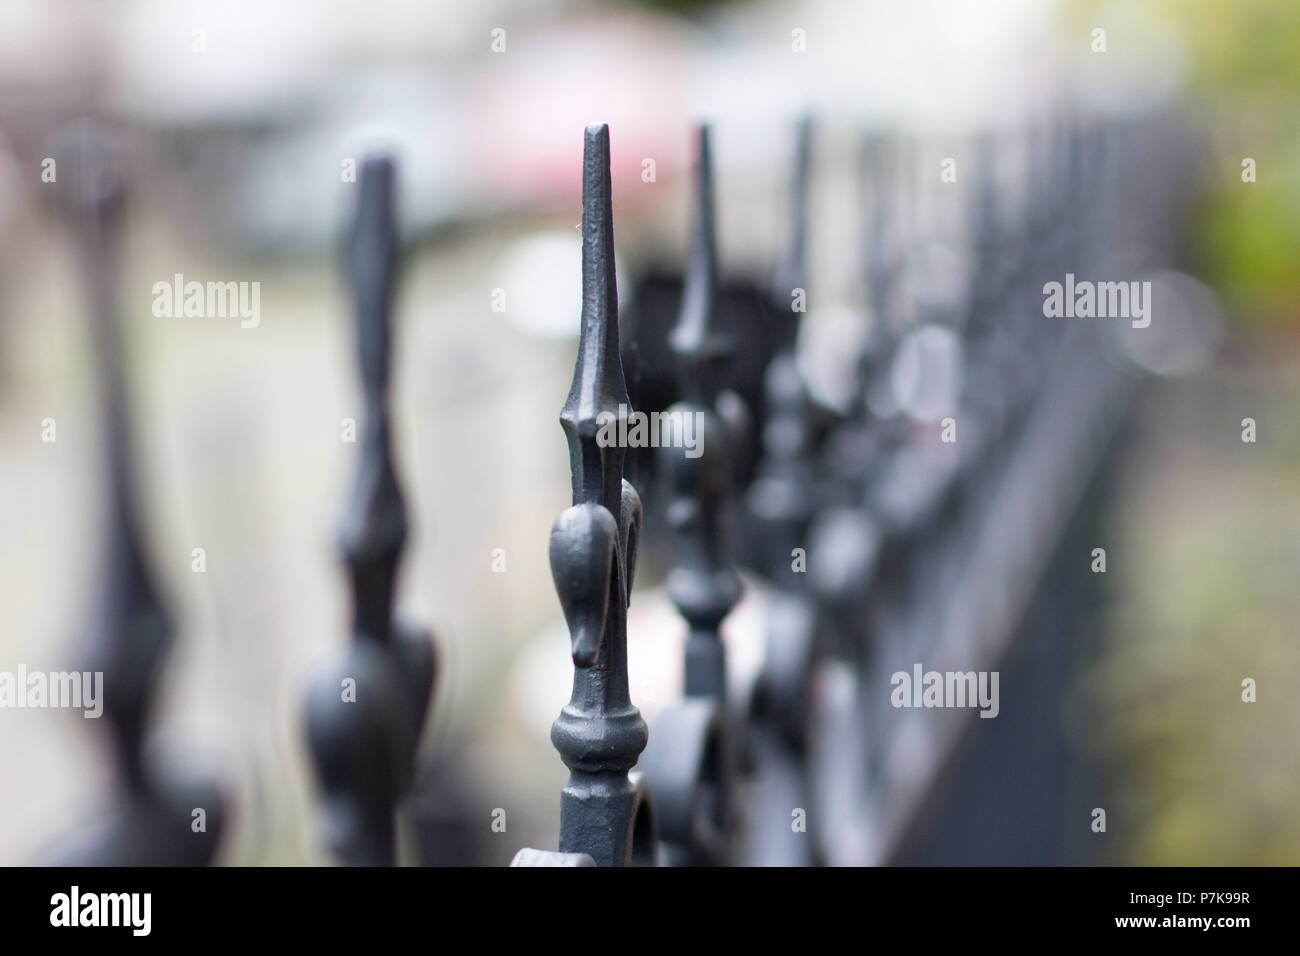 Metal fence, tips, detail, blurred writing Stock Photo - Alamy